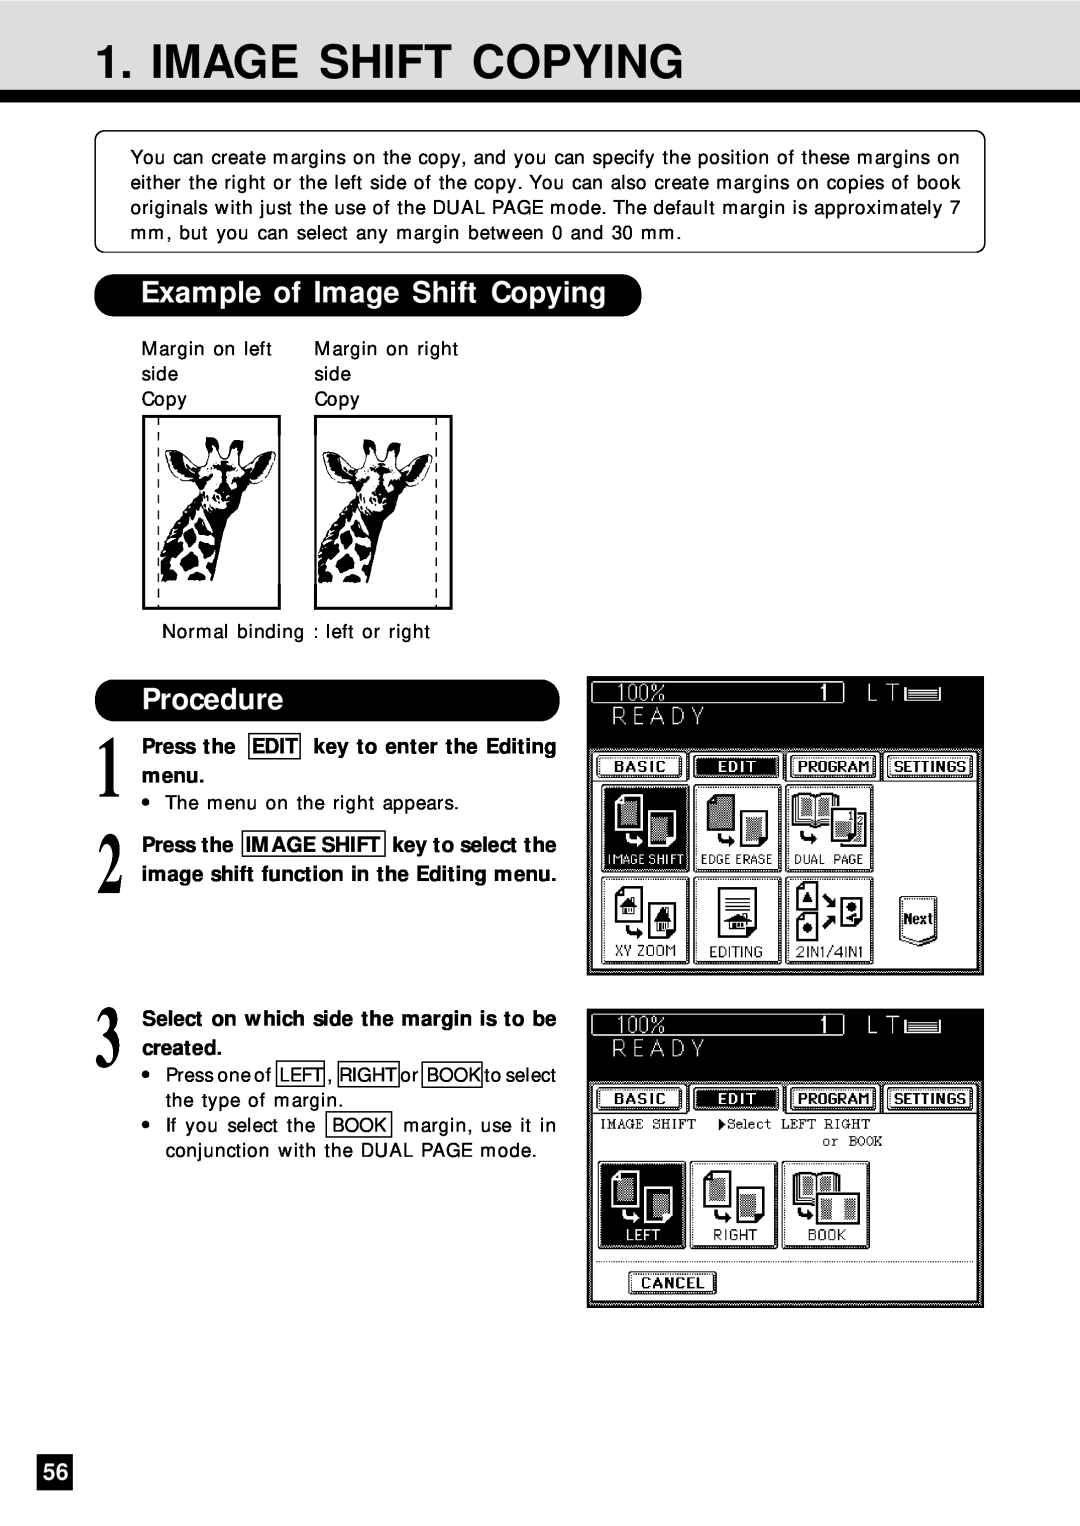 Sharp AR-650 operation manual Example of Image Shift Copying, Press the EDIT key to enter the Editing menu, Procedure 